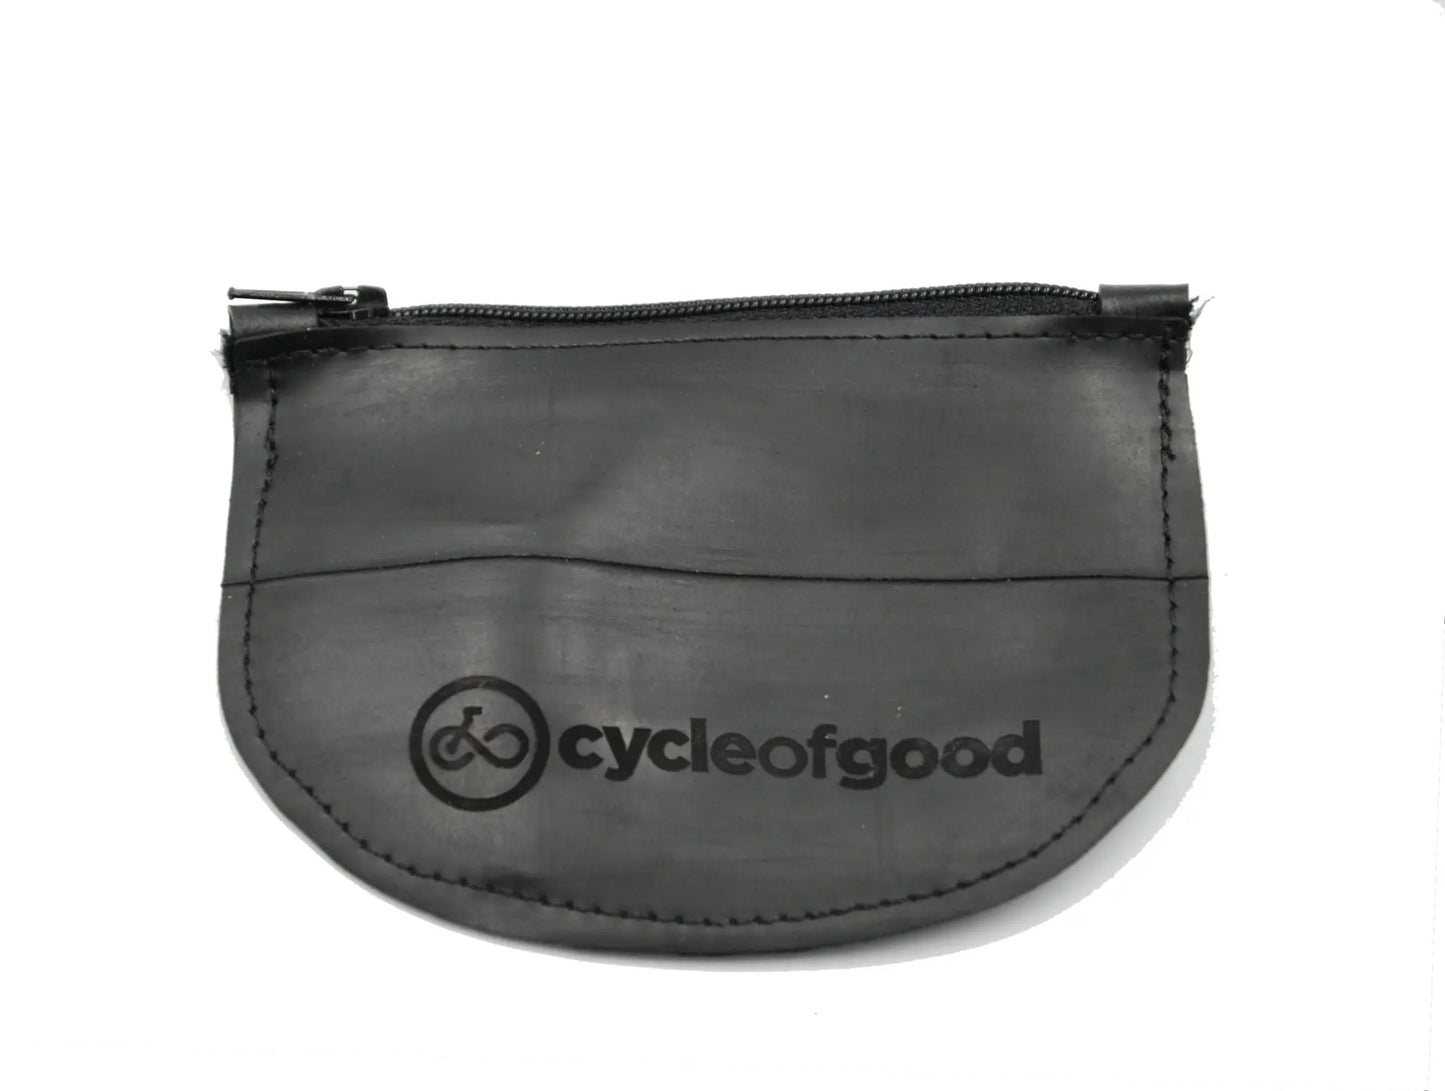 RECYCELED INNER TUBE COIN PURSE - Nostalgia Furniture & Gifts